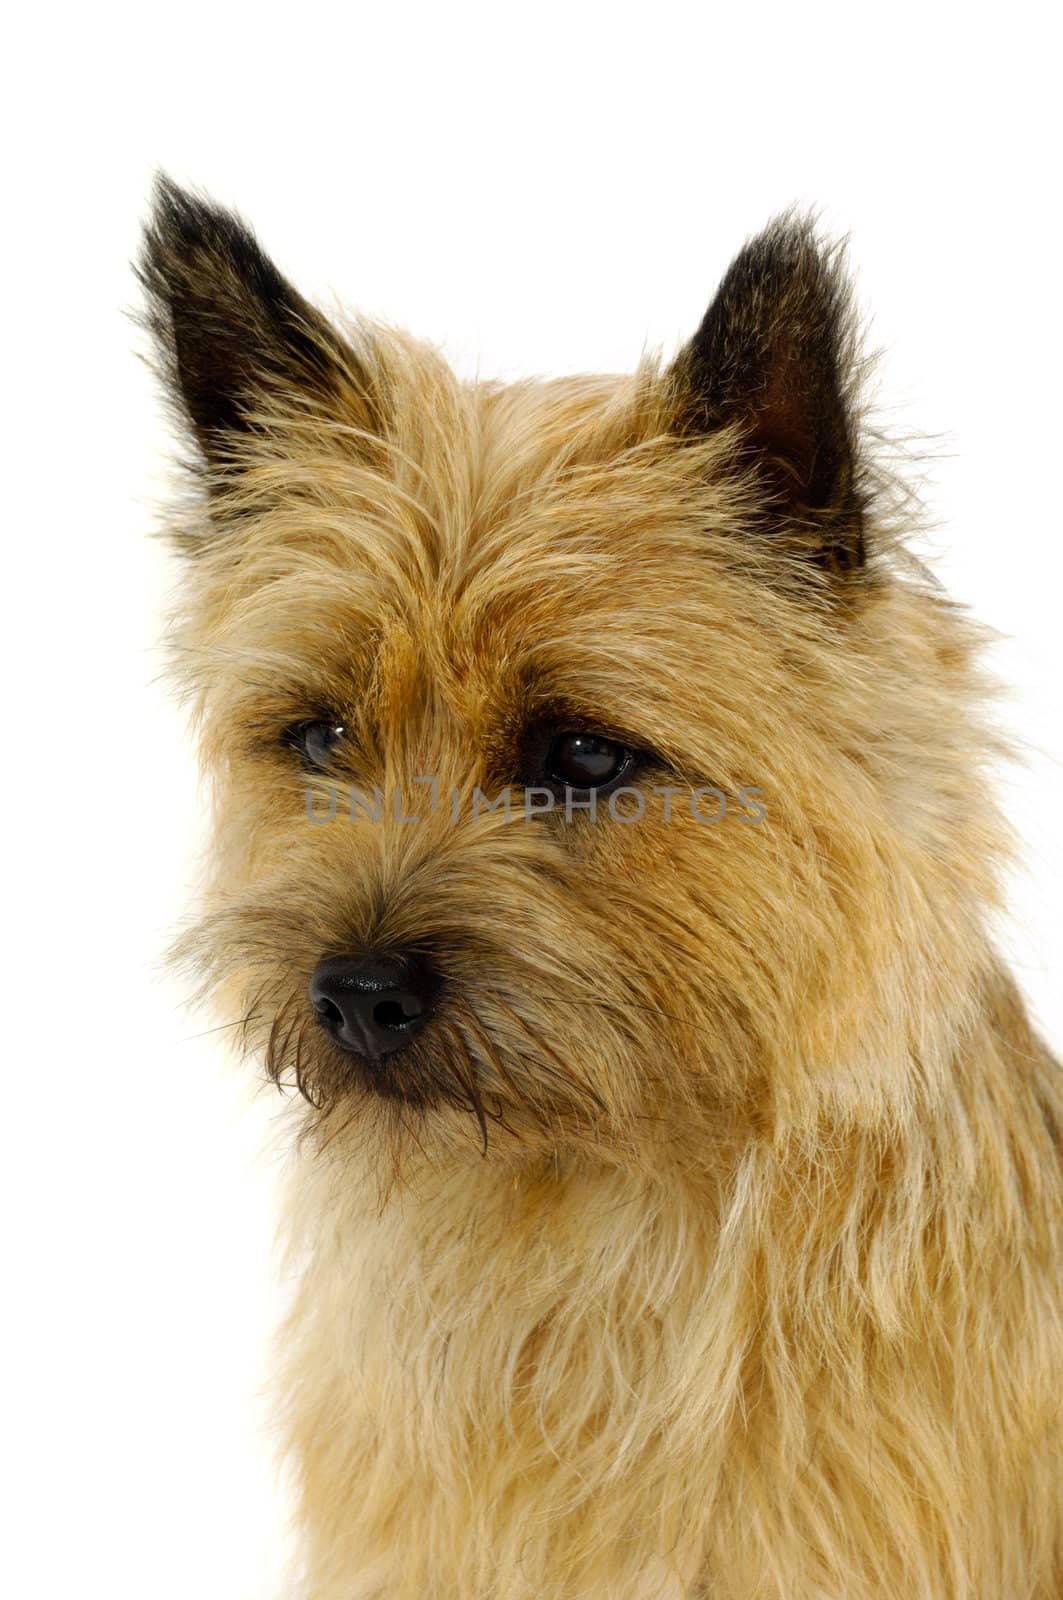 Face of sweet dog, taken on a white background. The breed of the dog is a Cairn Terrier.